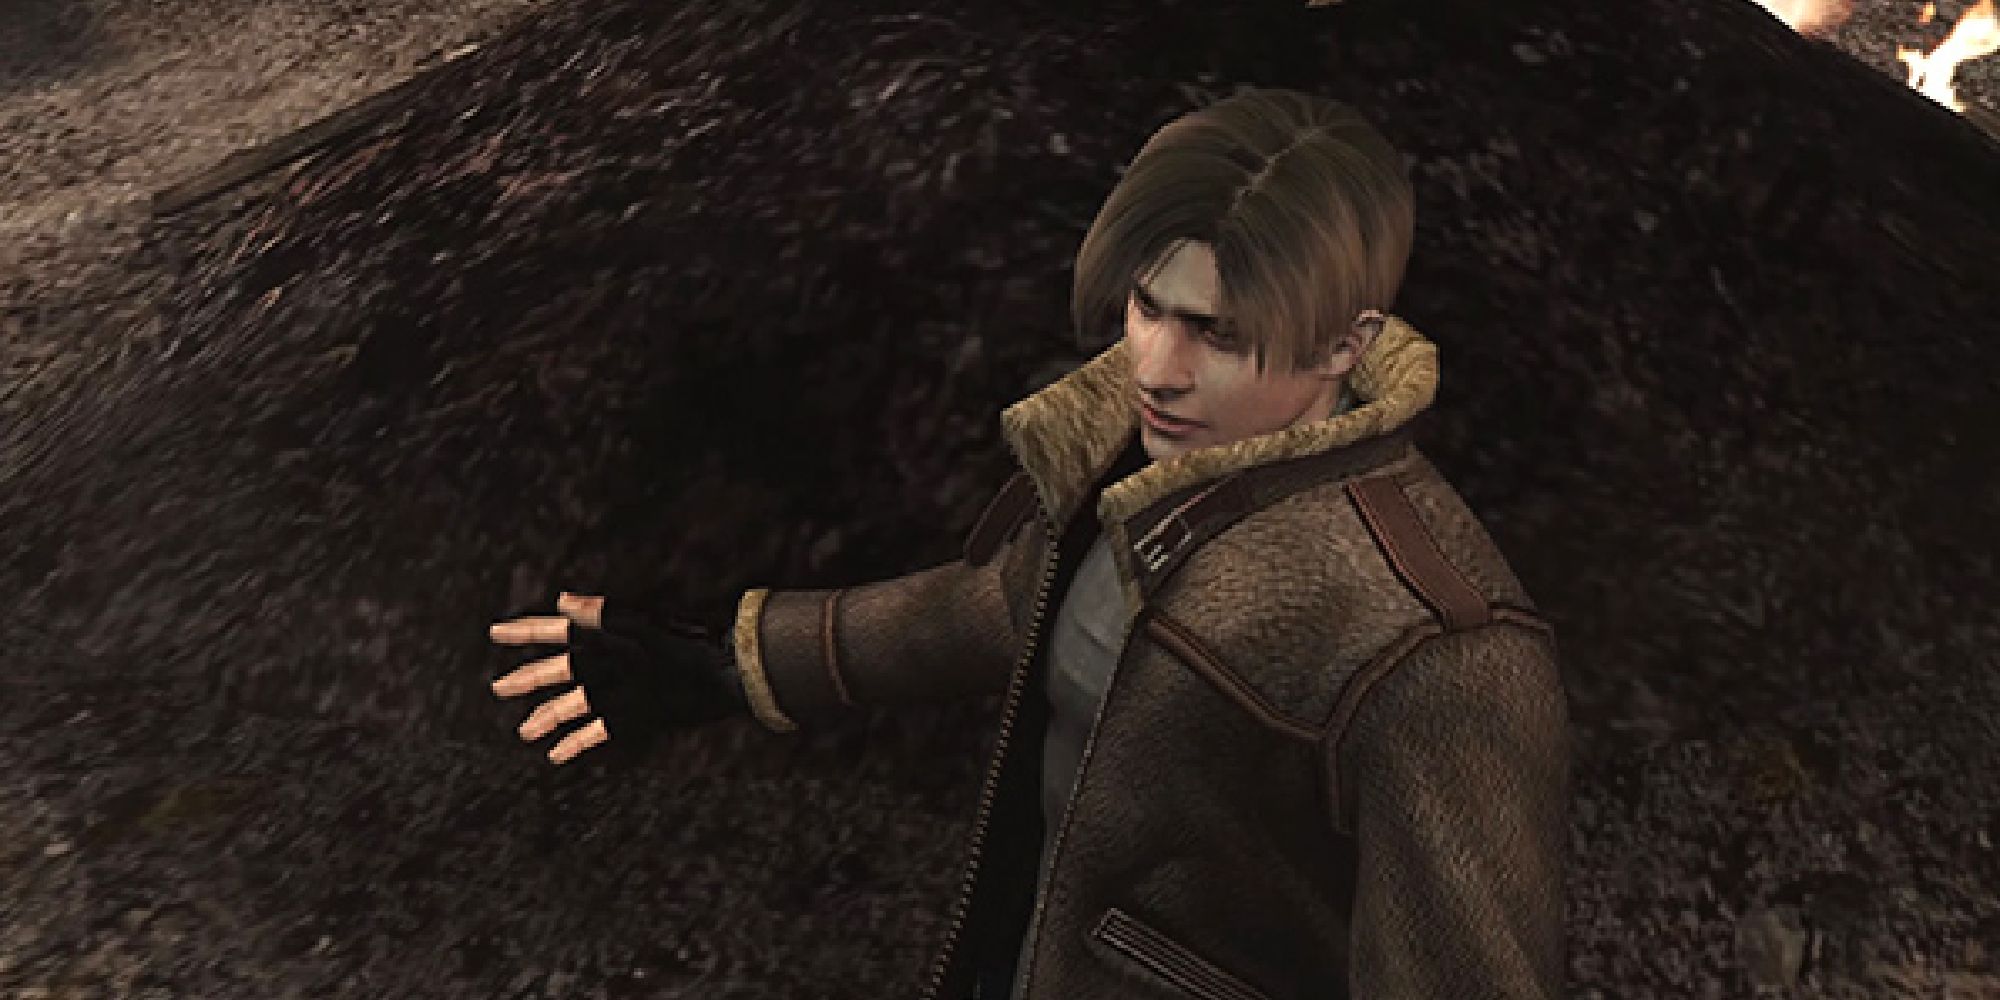 Leon questioning where all the villagers have gone after they abandon their attempts to kill him. 